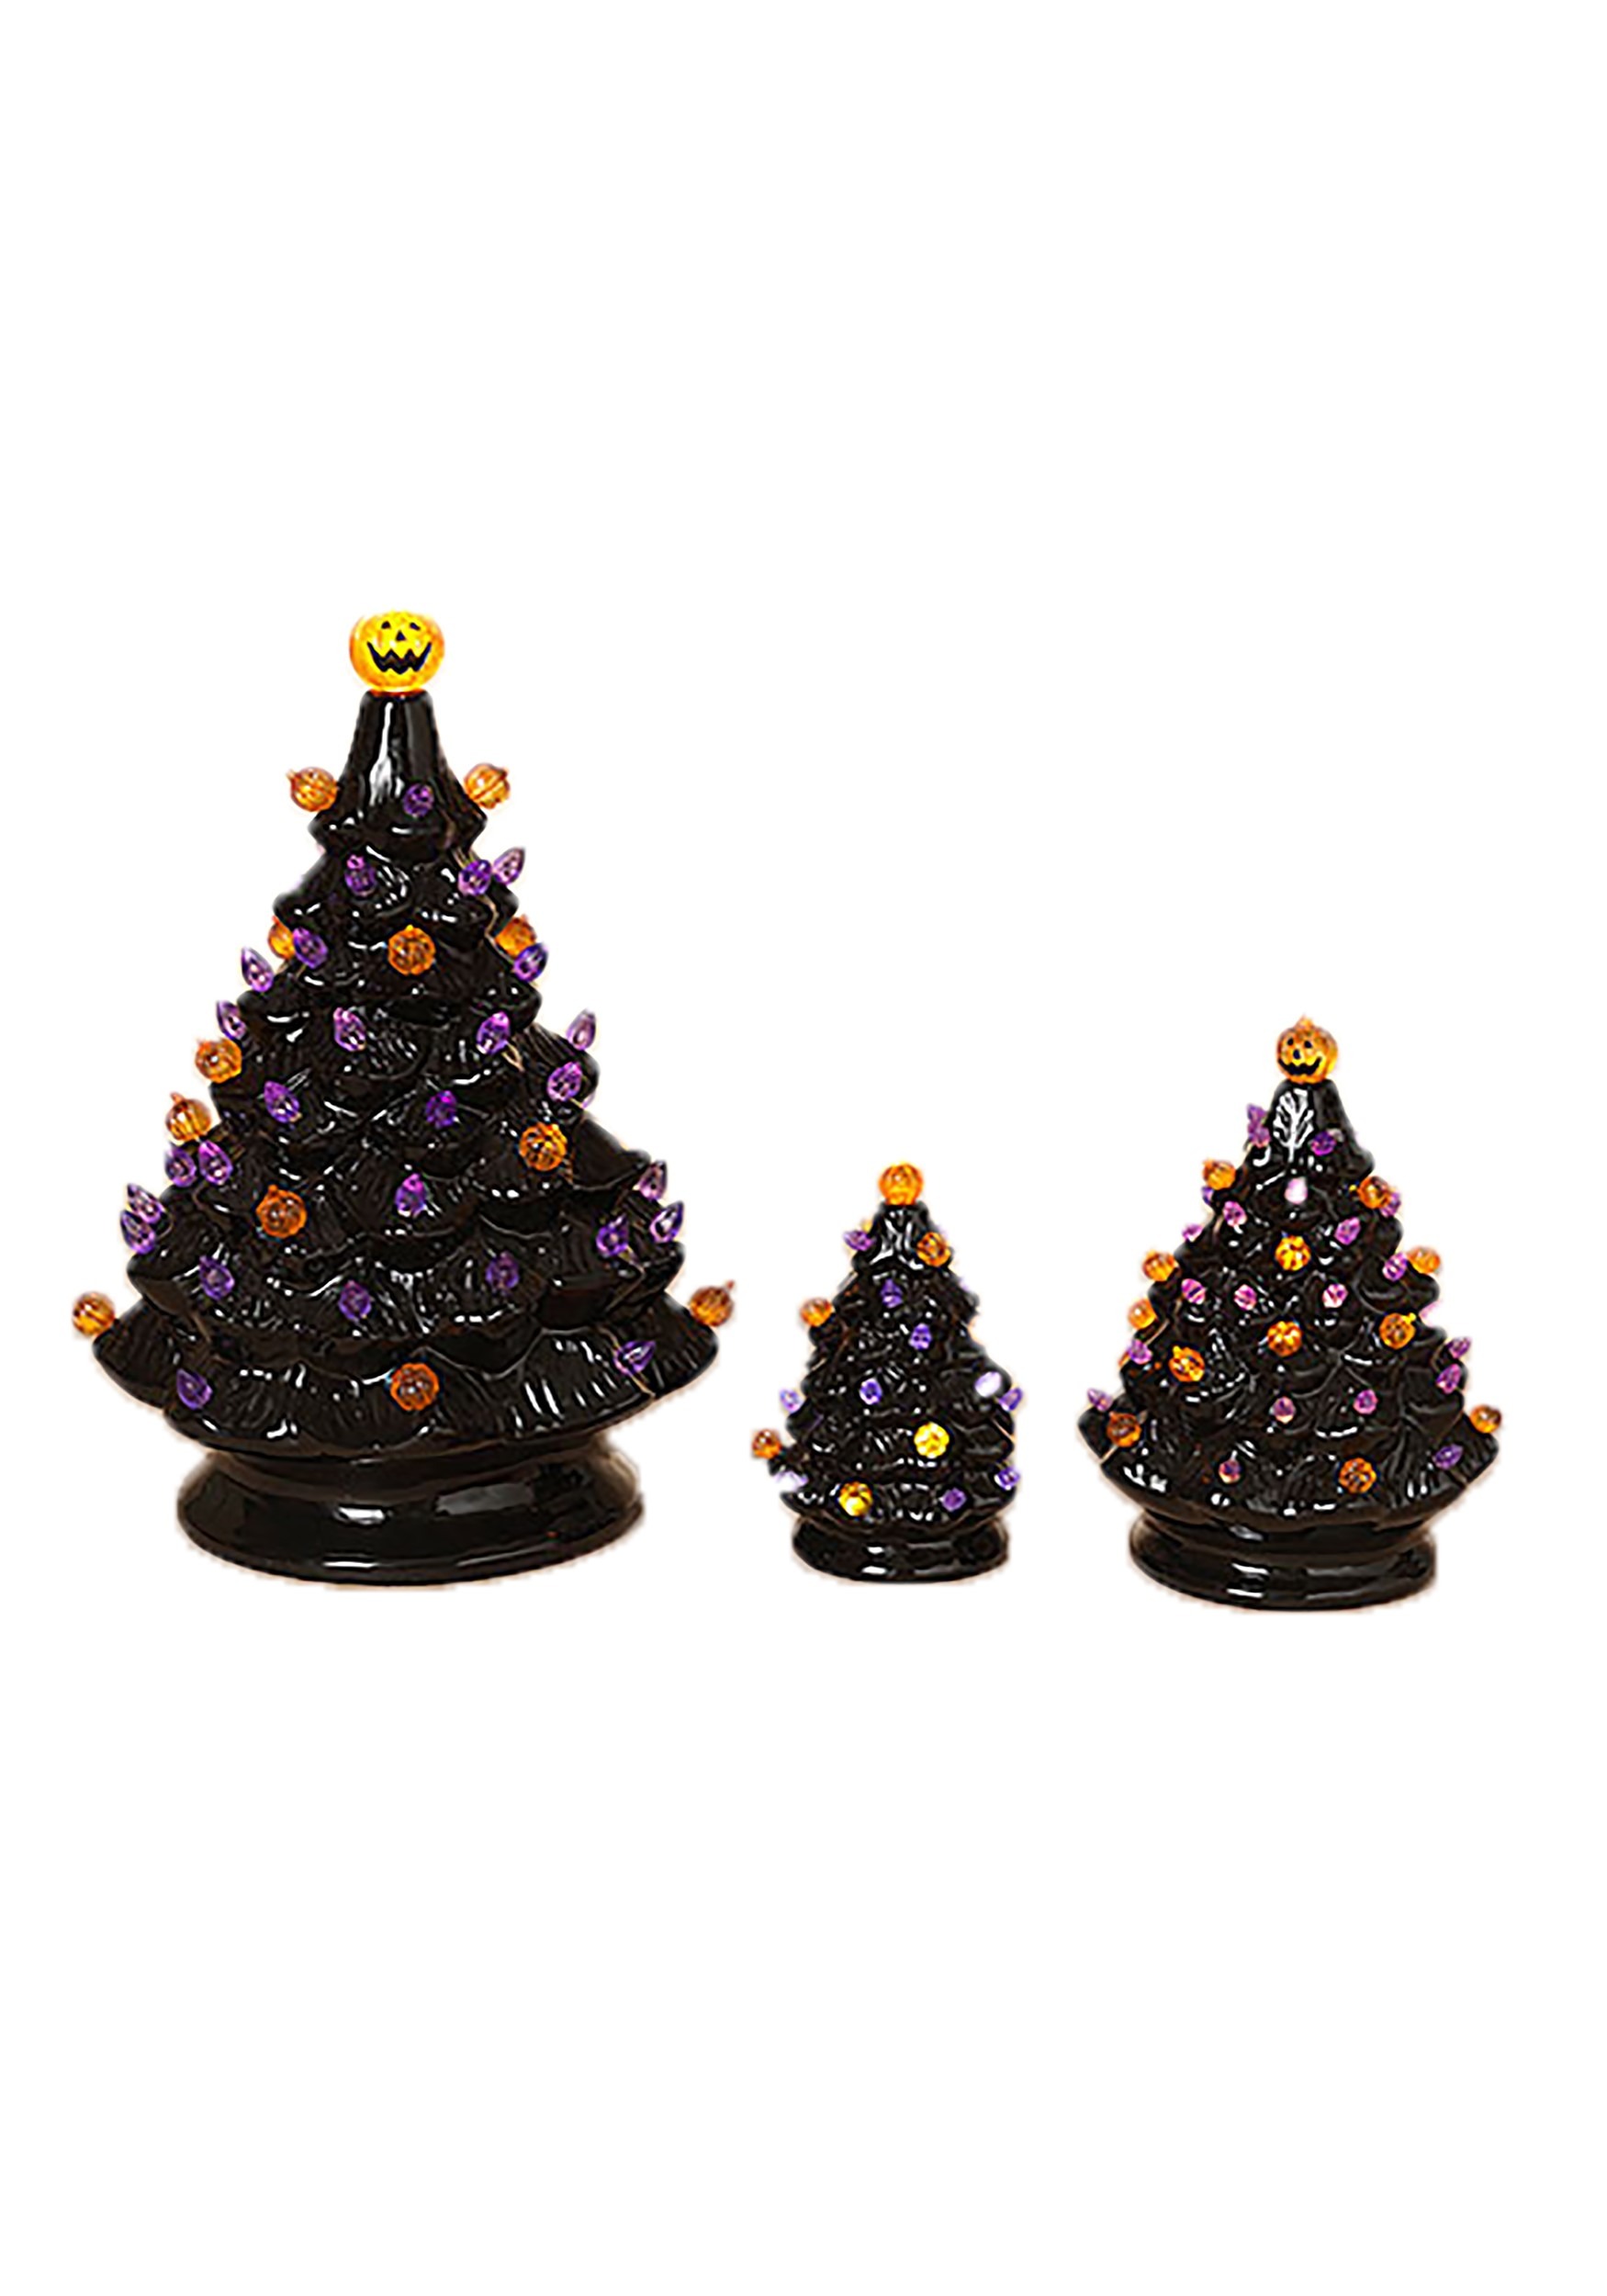 3 Lighted Dolomite Halloween Trees with Sound Decoration